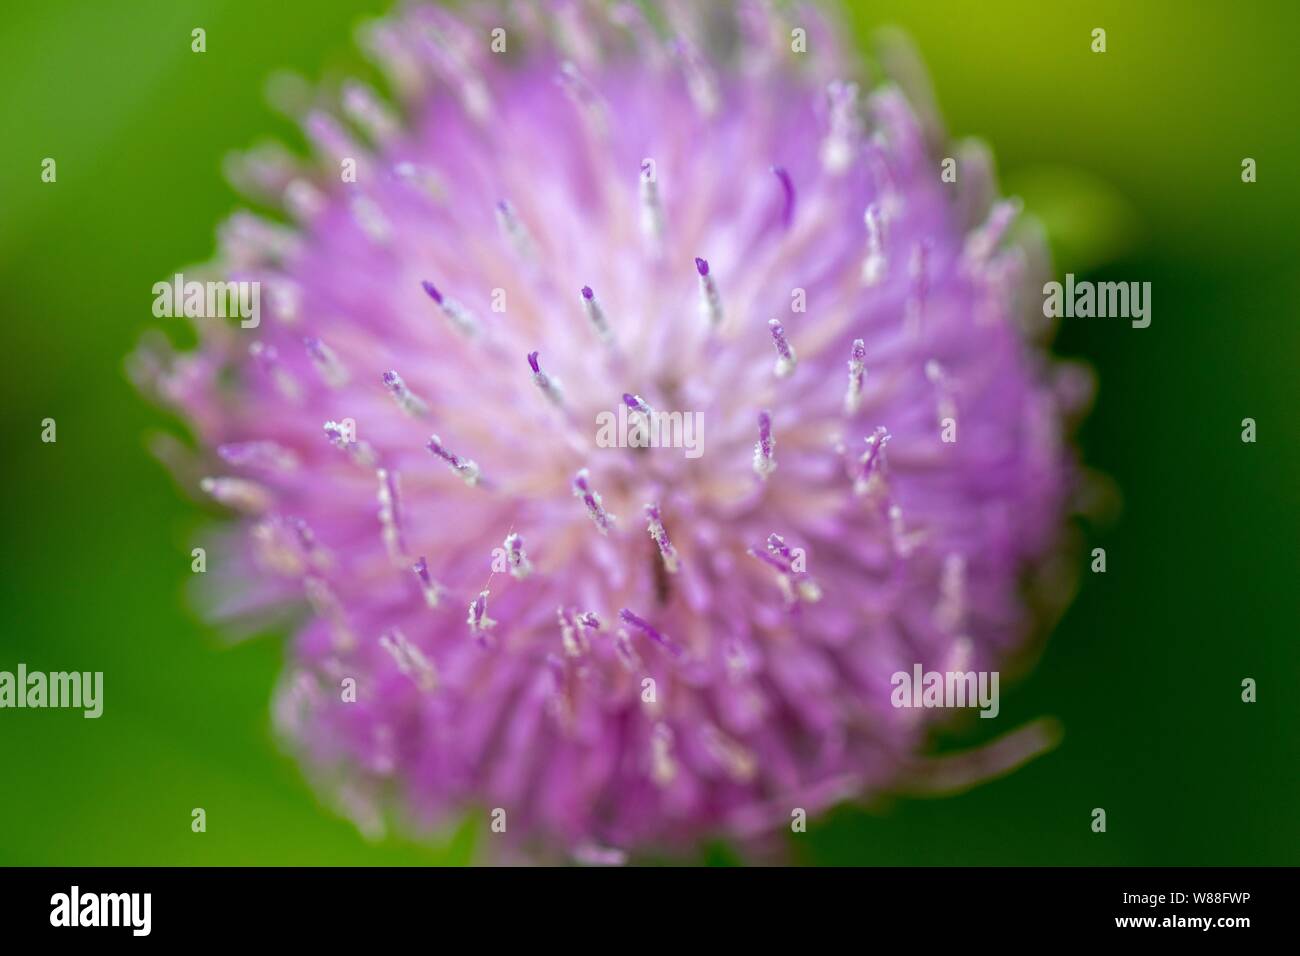 Extreme close up of purple flower Stock Photo